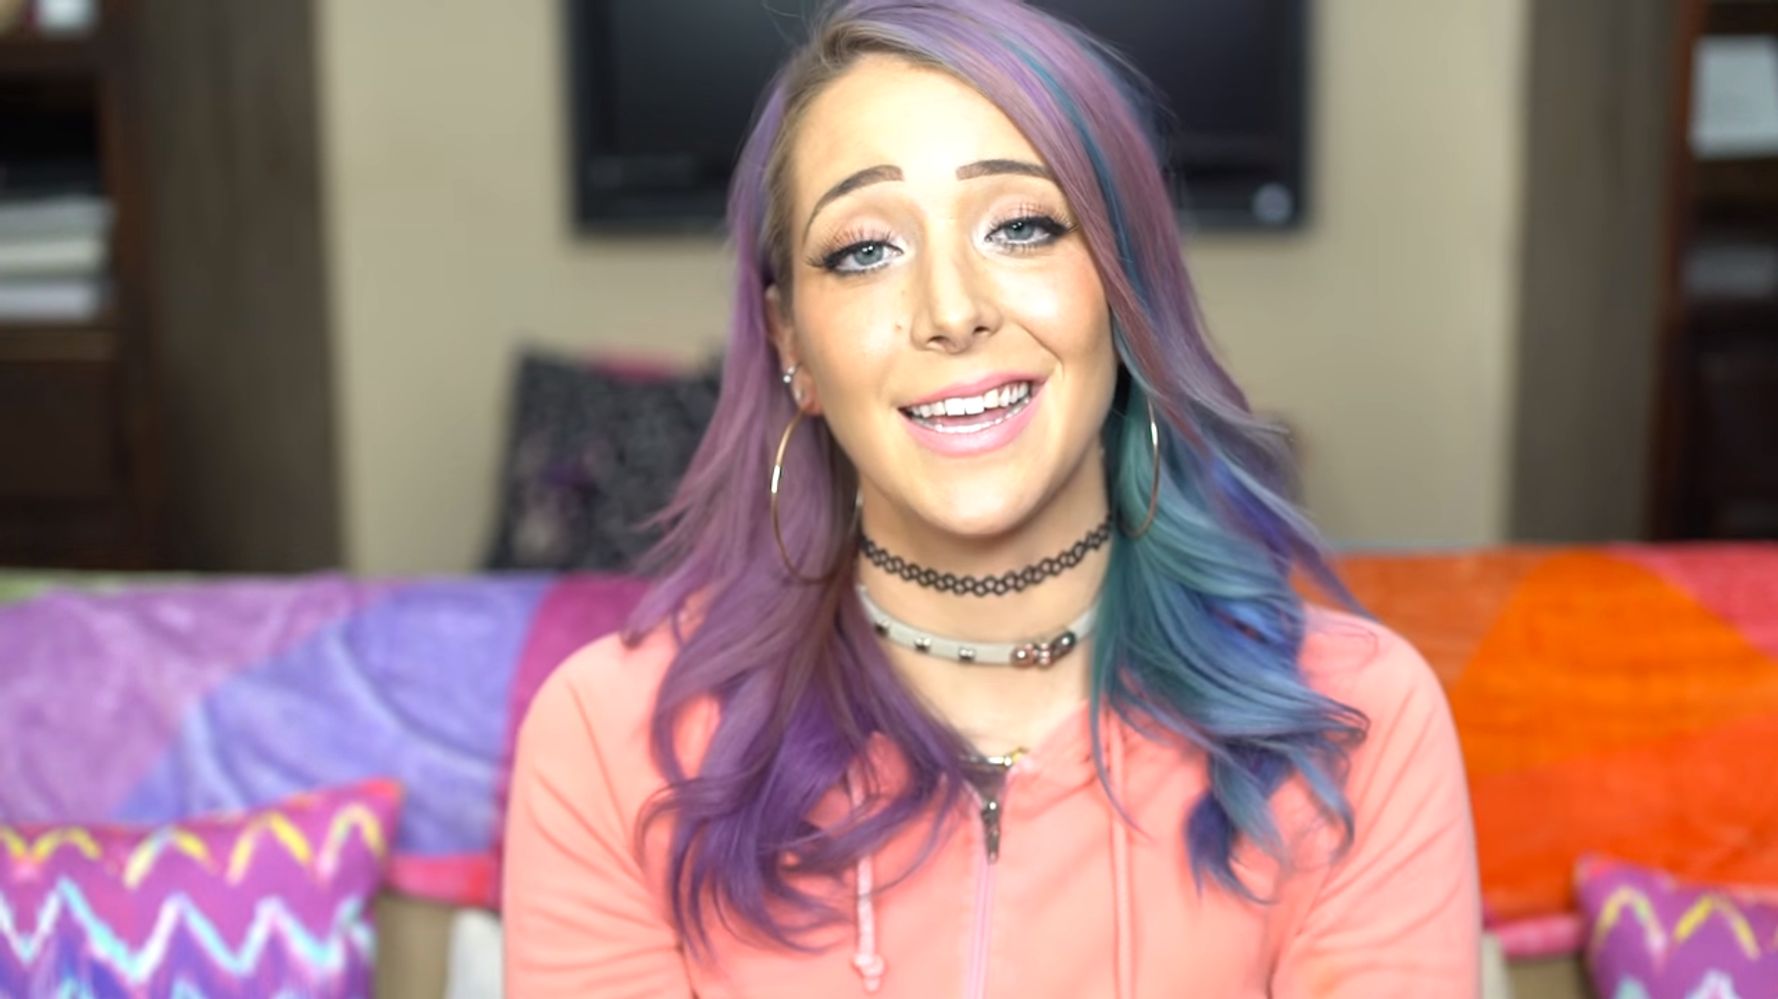 Jenna Marbles Busts Out A 5-Minute String Of Solid Dad Jokes.